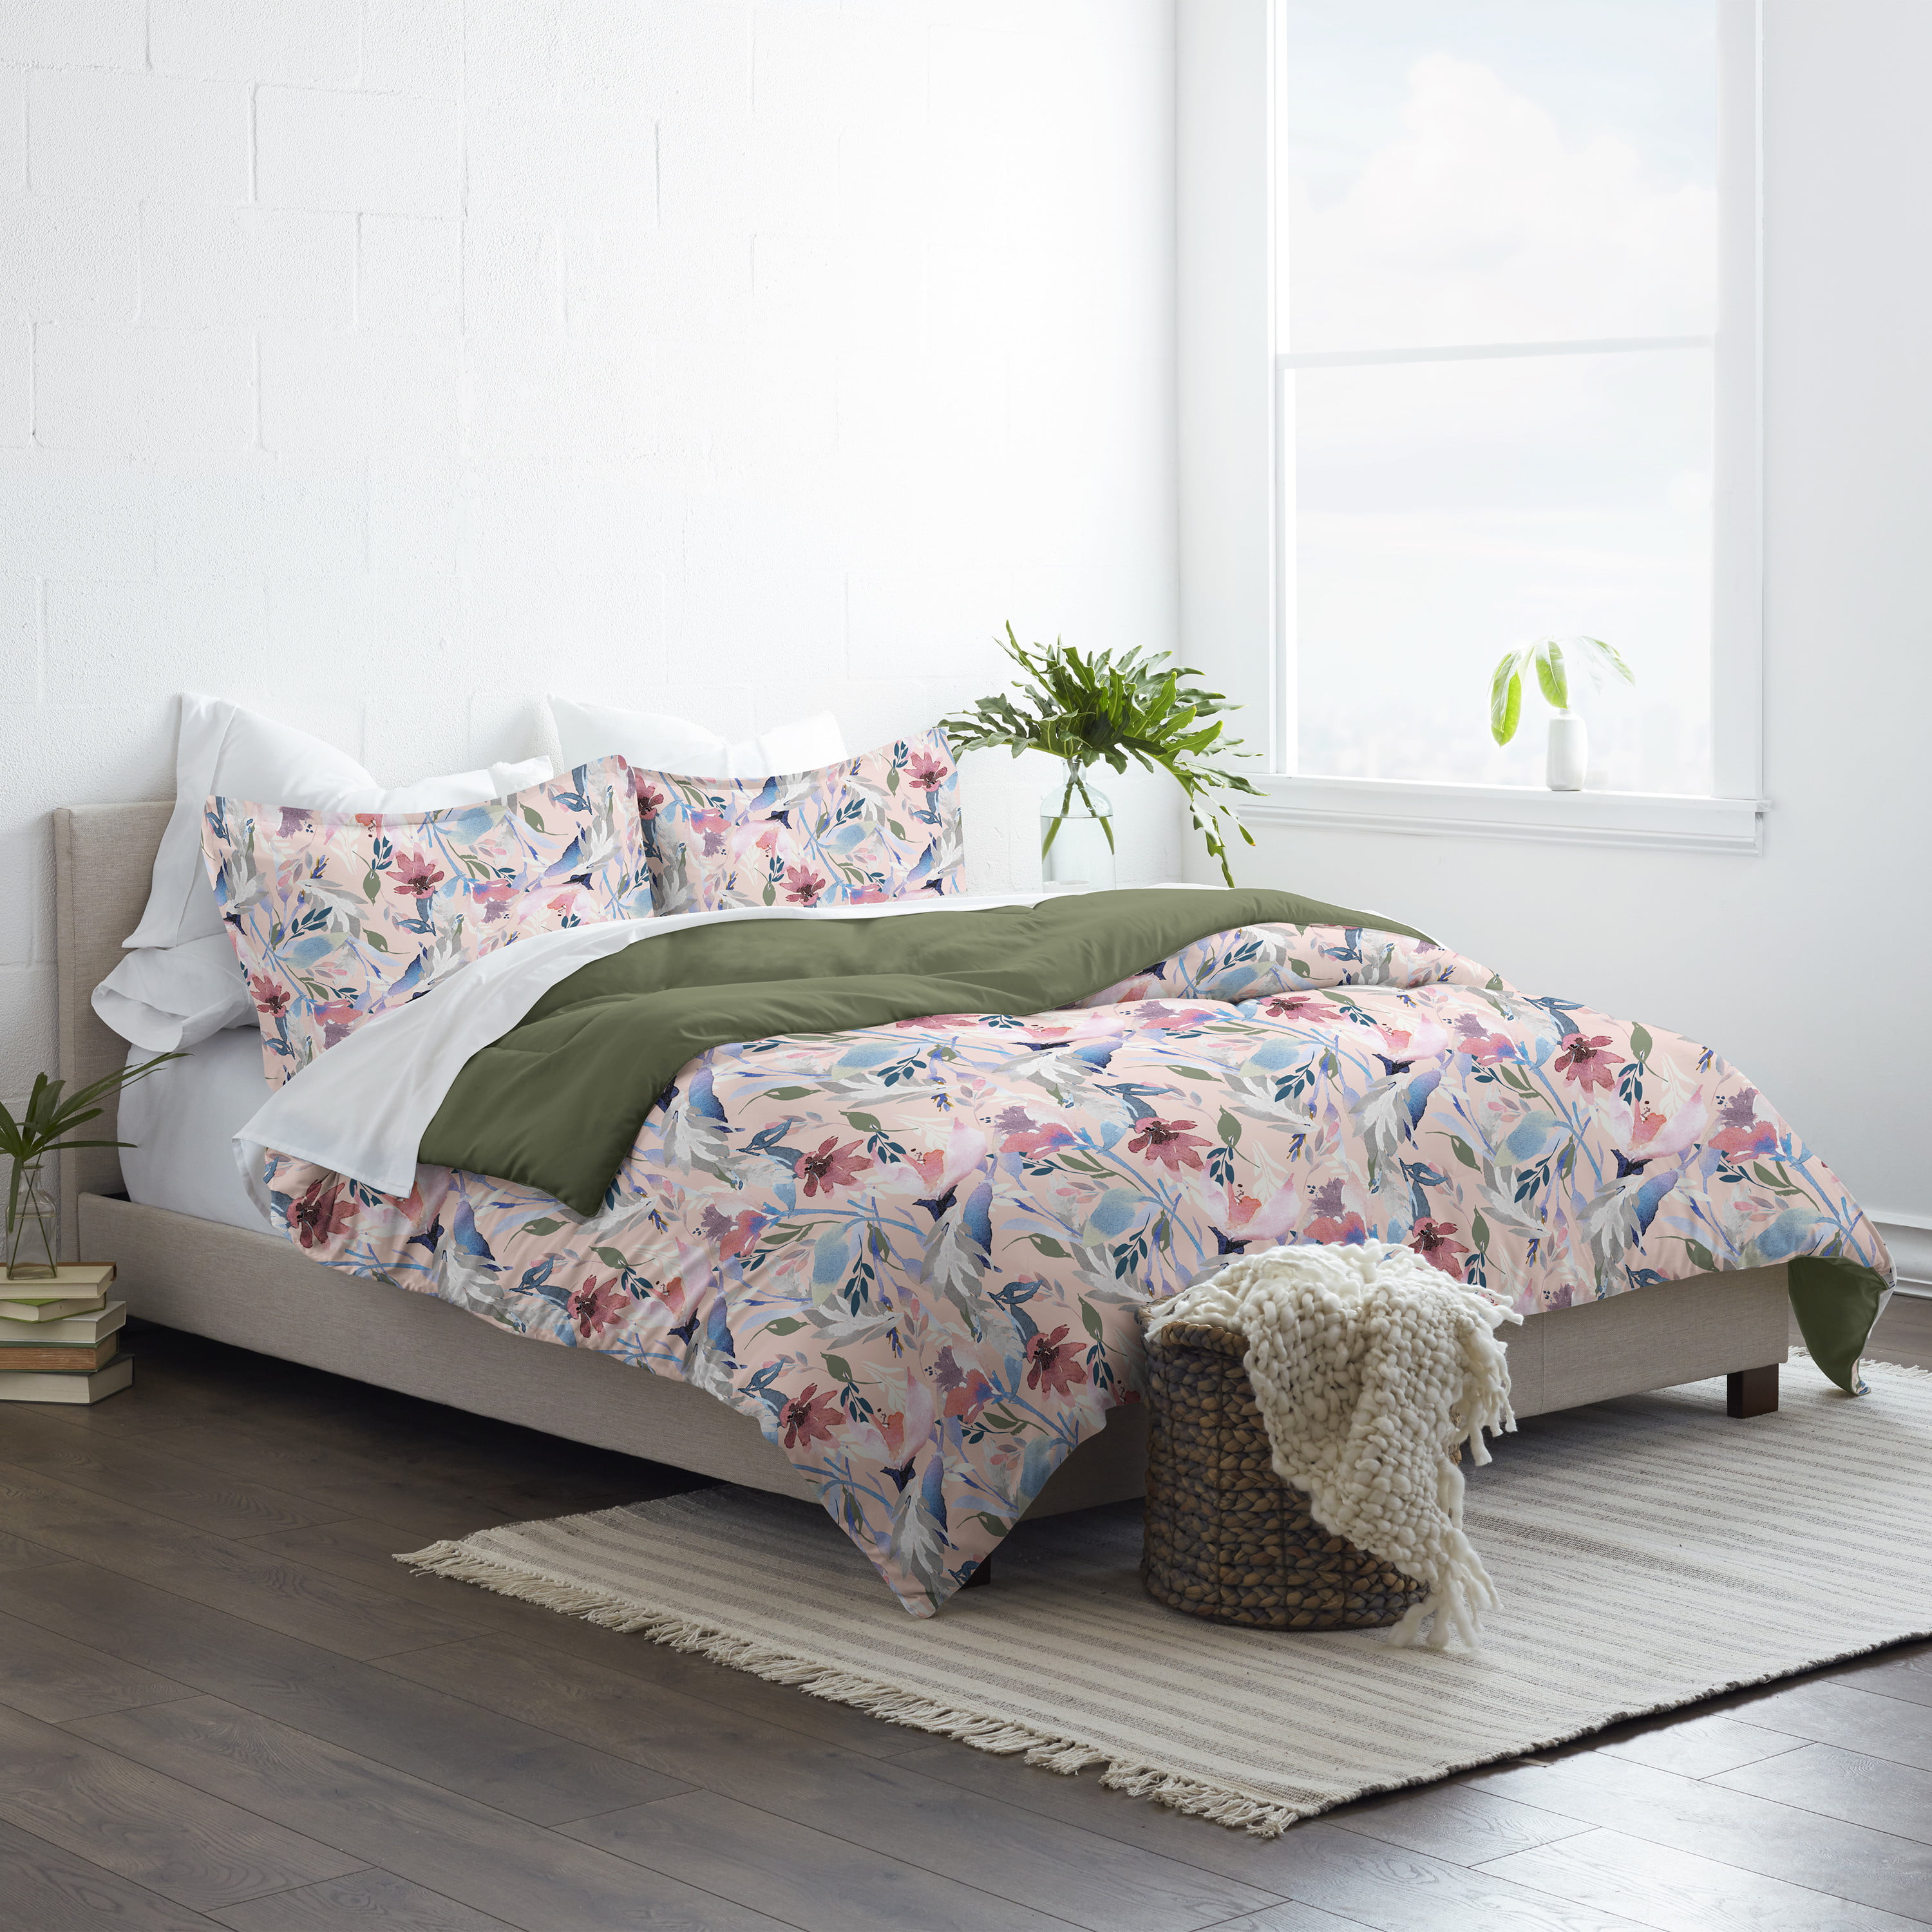 Pixel Details Rainbow Print Details about  / Abstract Quilted Coverlet /& Pillow Shams Set